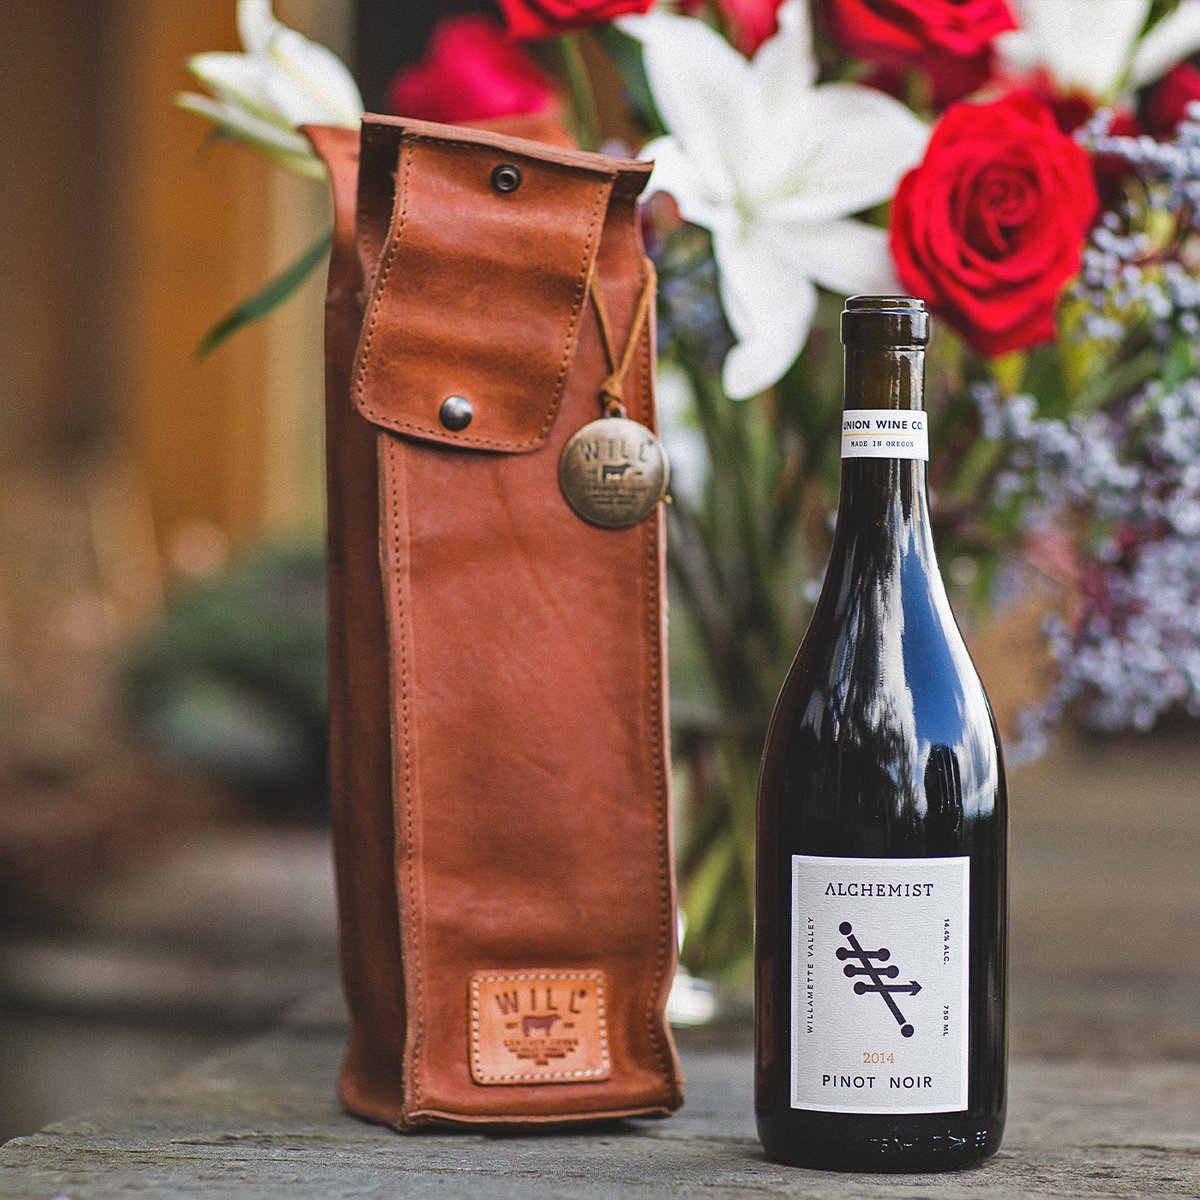 Going to dinner at a friend's house? A bottle of wine & flowers are the perfect combo. Add our full-grain leather bottle holder, and you have an unforgettable gift.
bit.ly/WLG_WineCases

#winecase #winelover #winestagram #winetime #bottlesleeve  #bottlecase #winecover